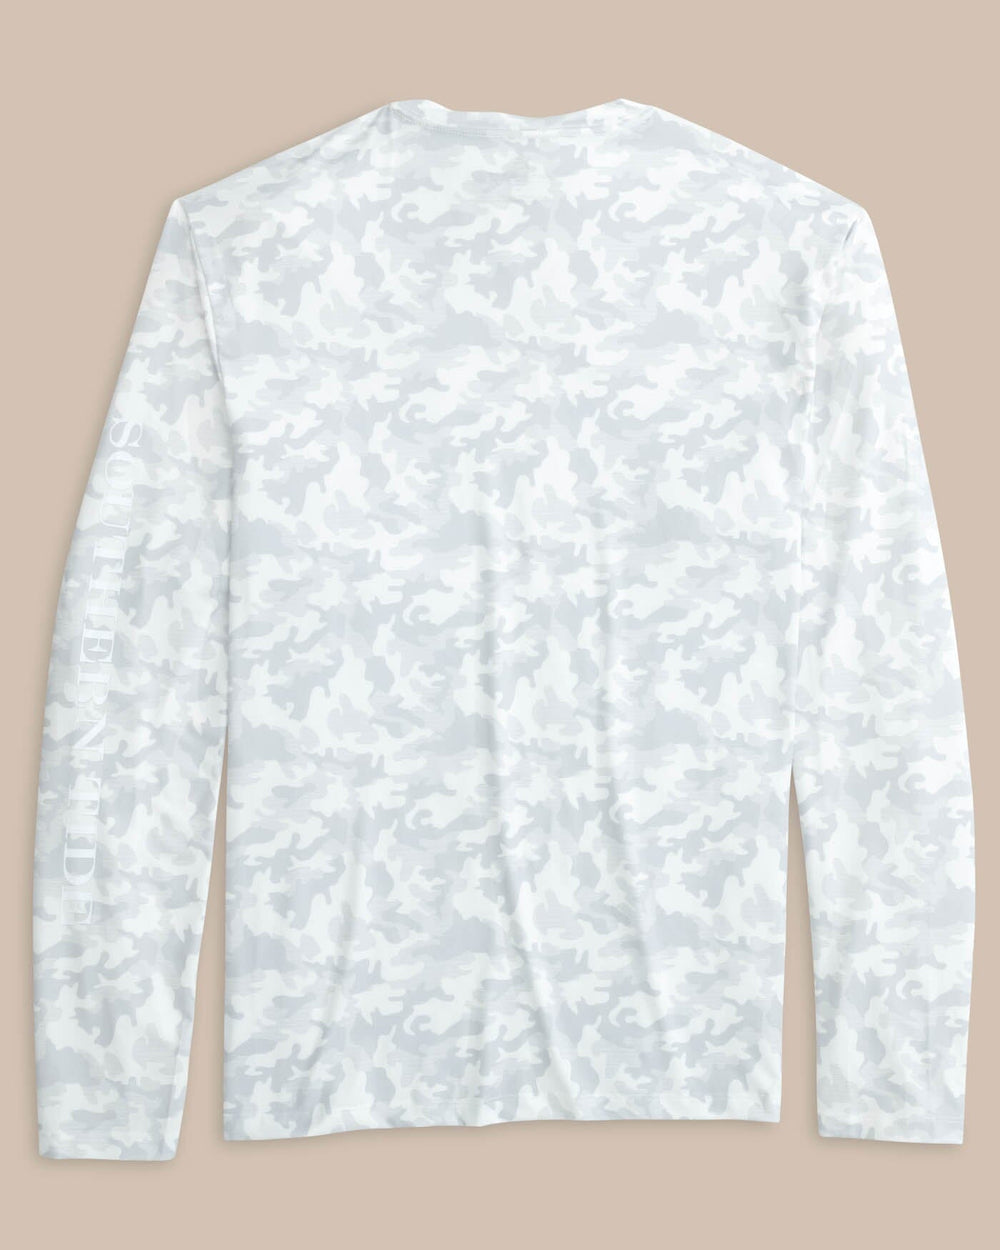 The back view of the Southern Tide Island Camo Long Sleeve Performance T-shirt by Southern Tide - Classic White